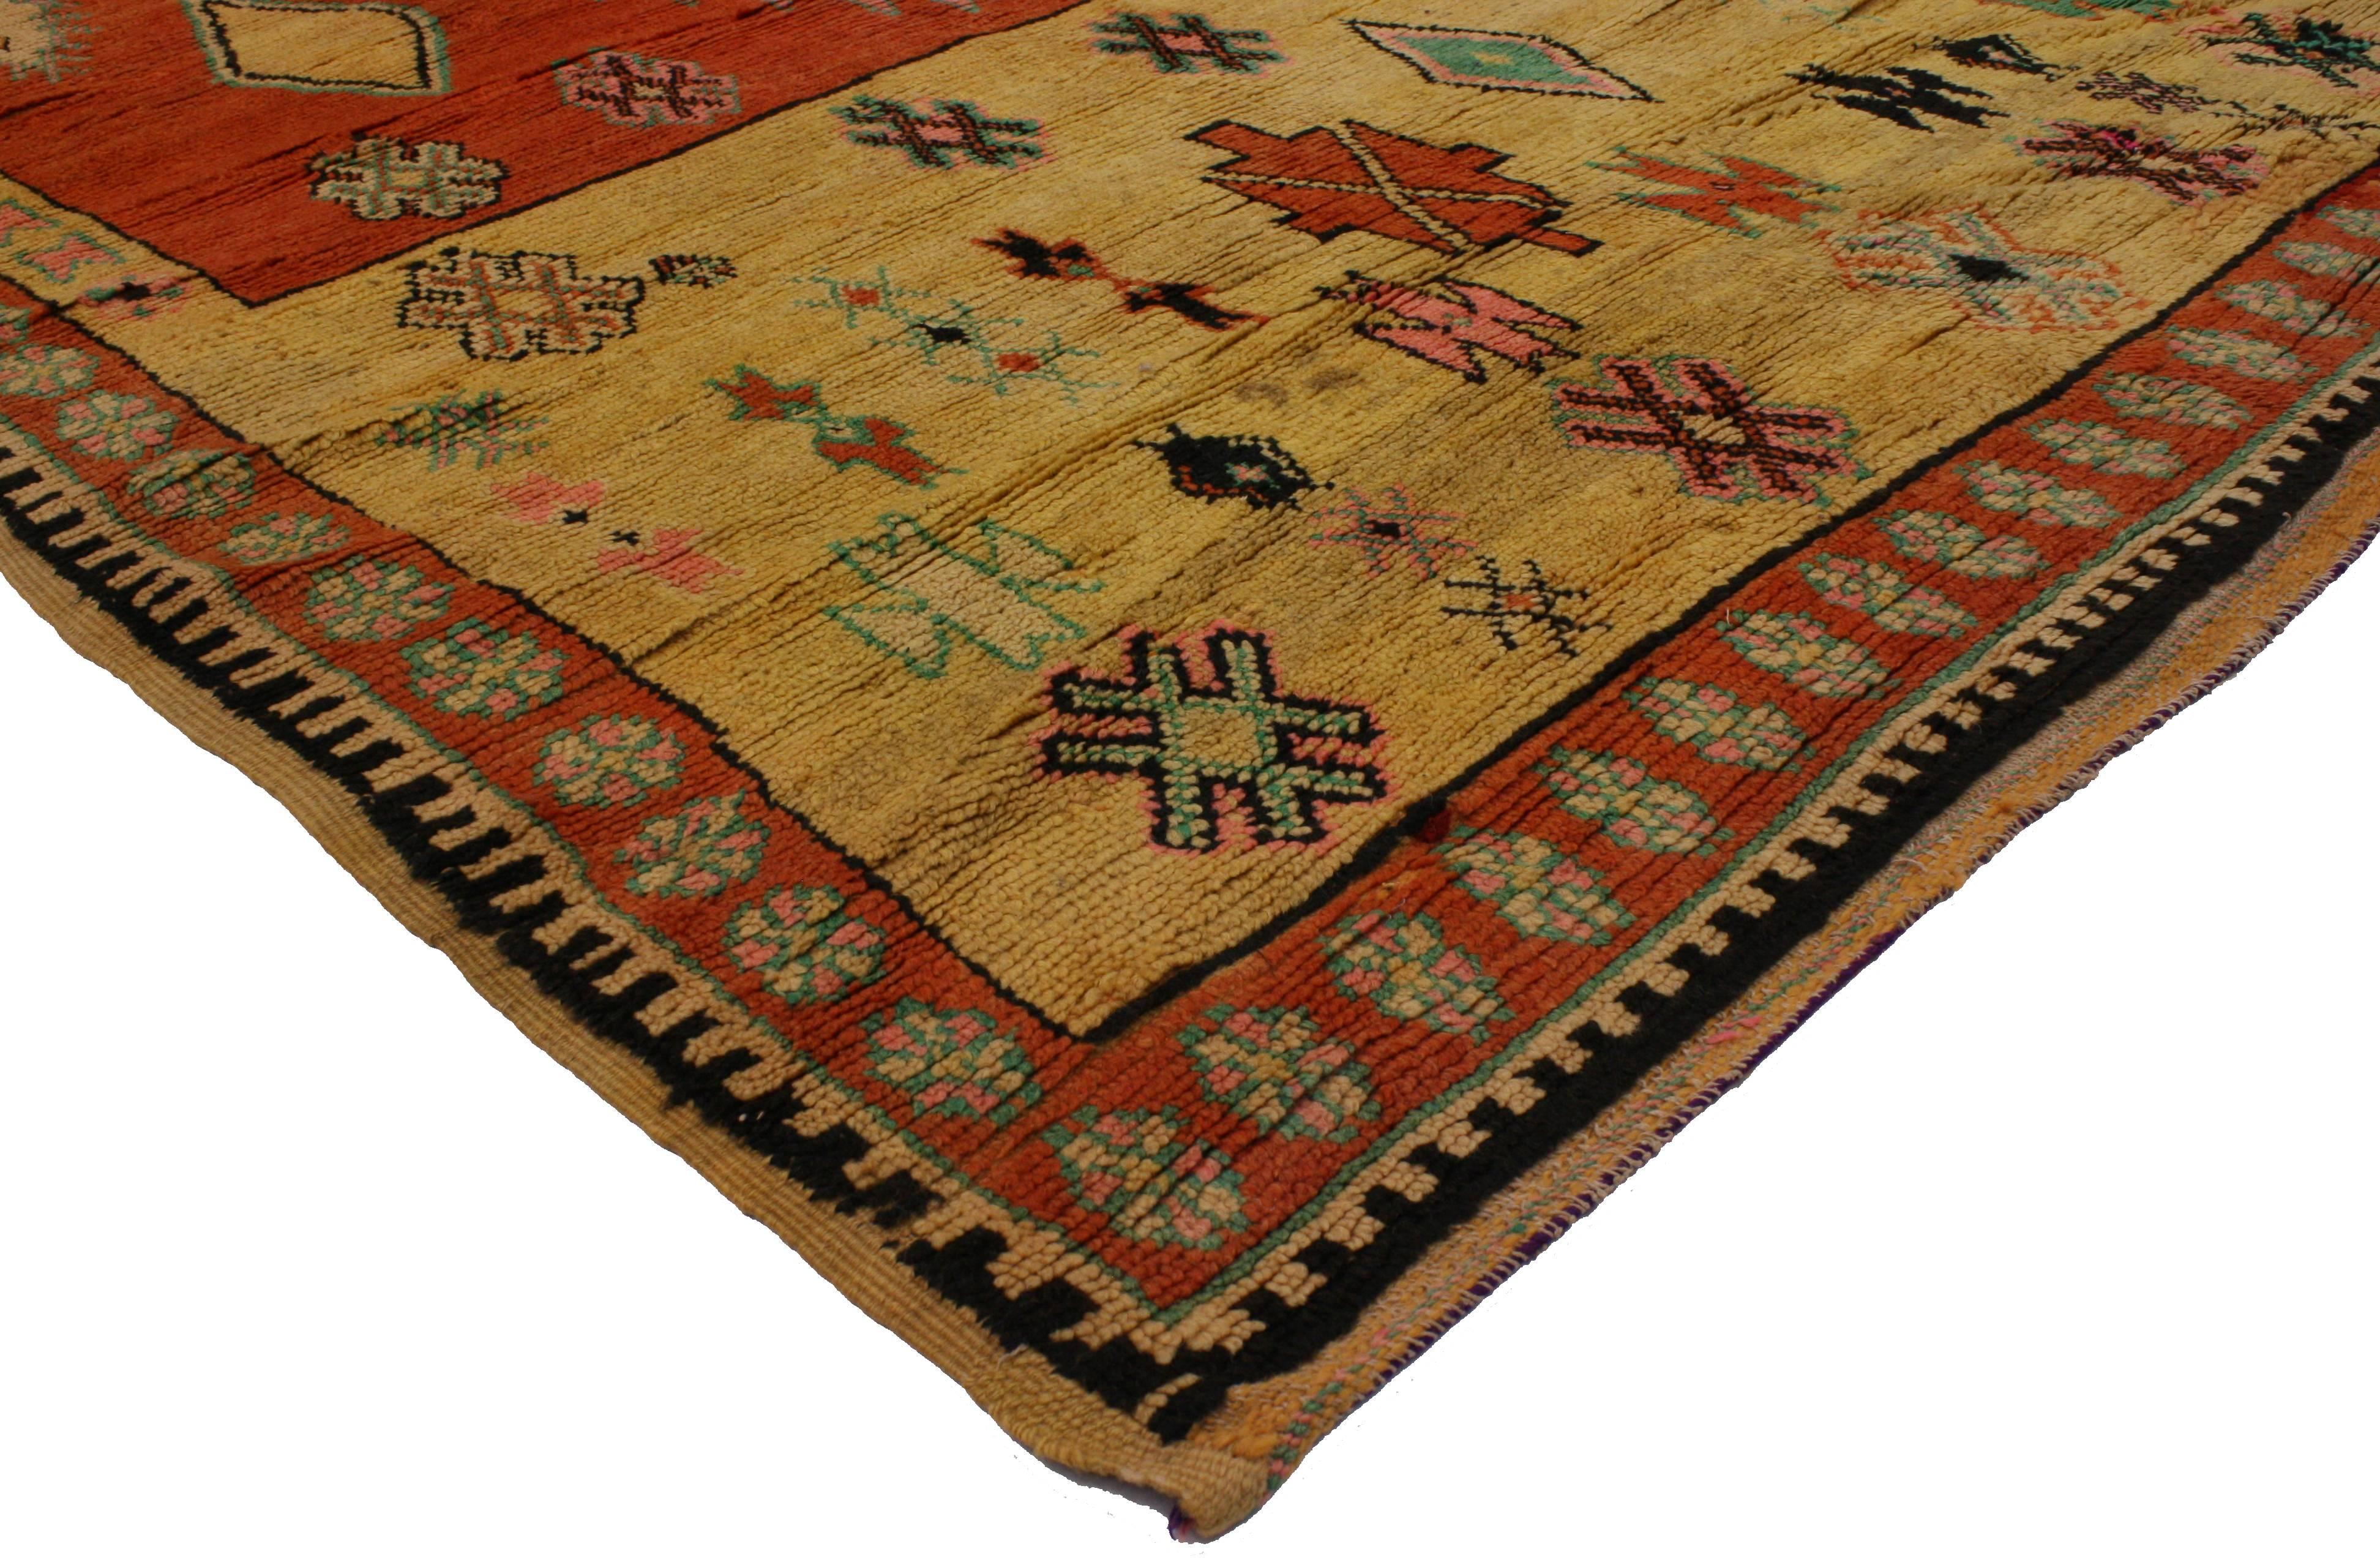 Woven by The Berber Tribes of Morocco, this modern rug showcases a phenomenal variety of ancient protection symbols. While the patterns may seem whimsical and random – they are very significant to the rug weaver’s life. The Berber women incorporate